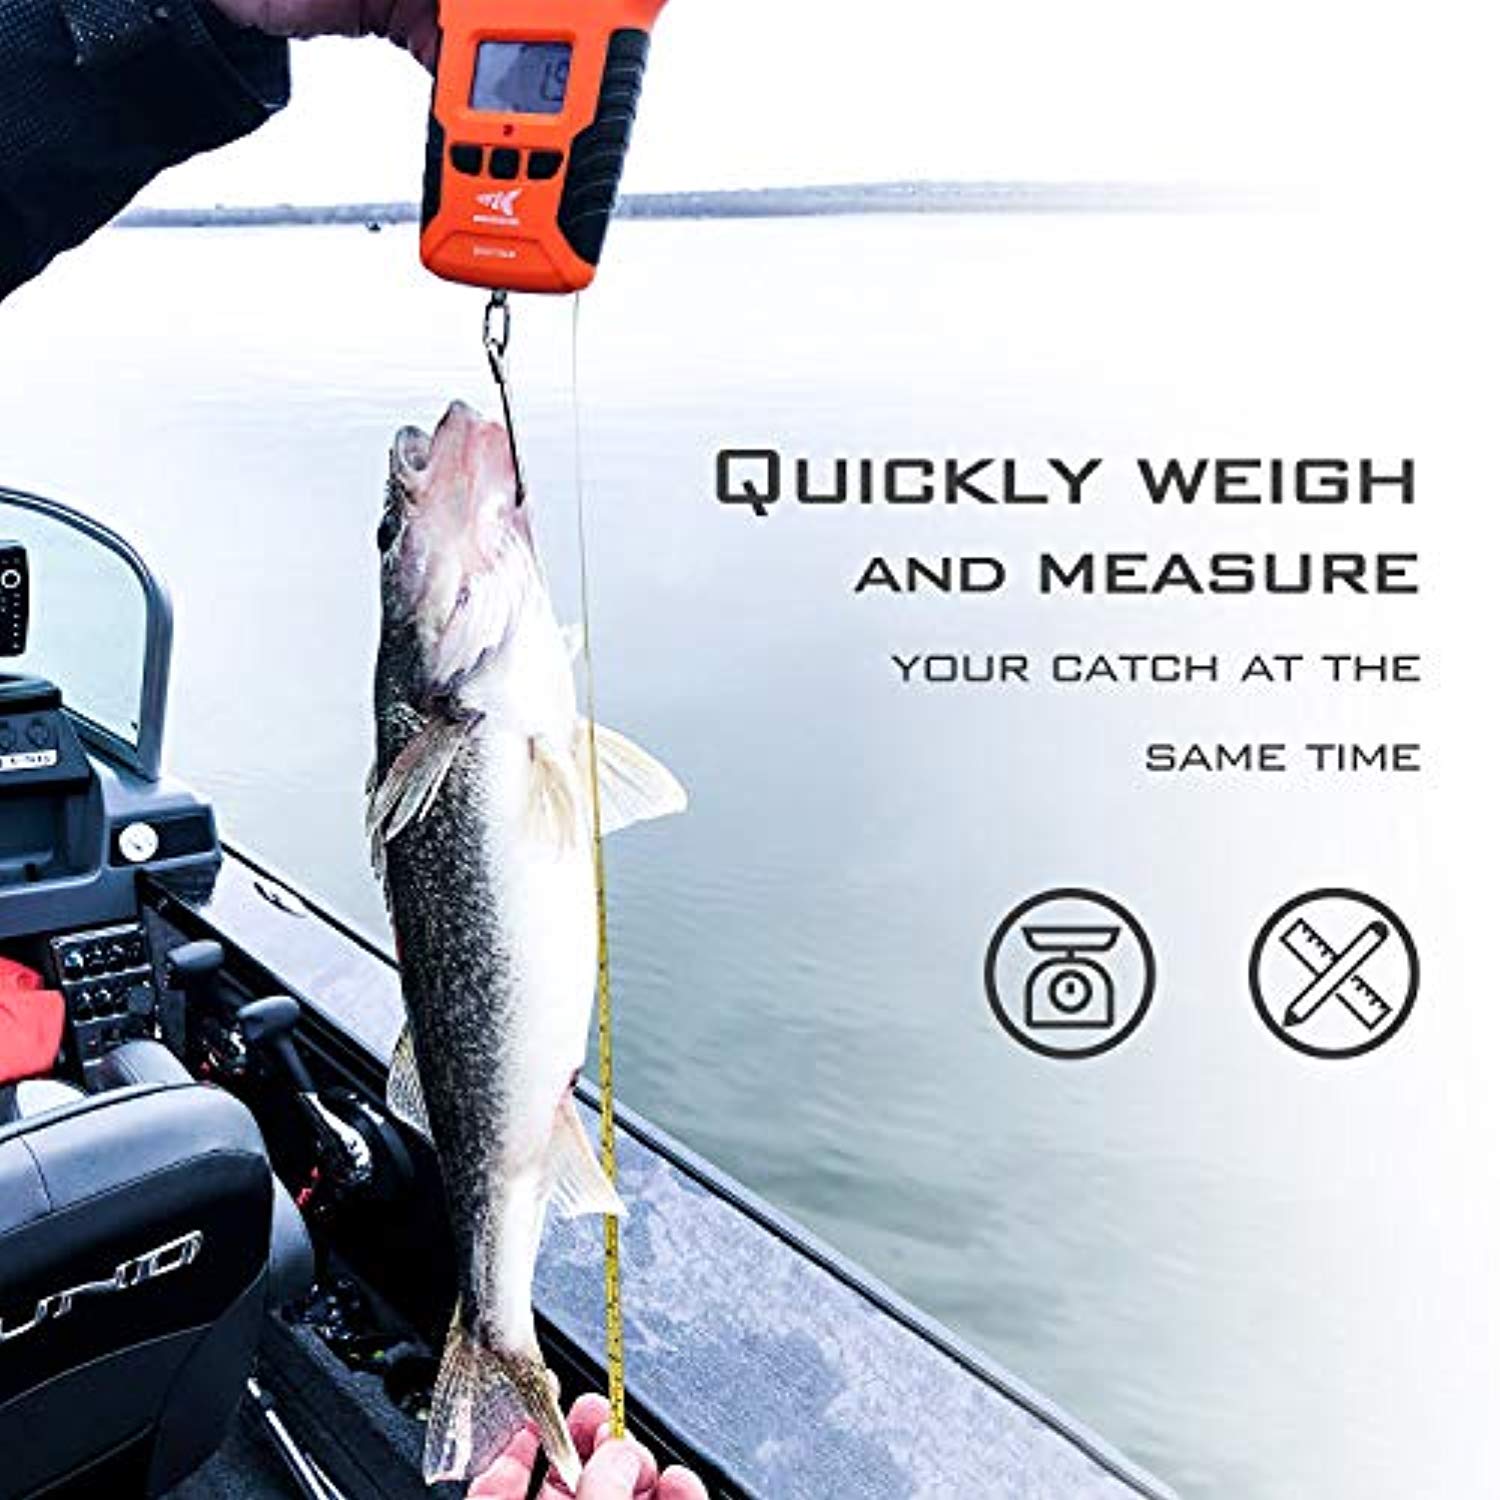 In Focus: Measuring and Weighing Devices for Kayak Fishing 